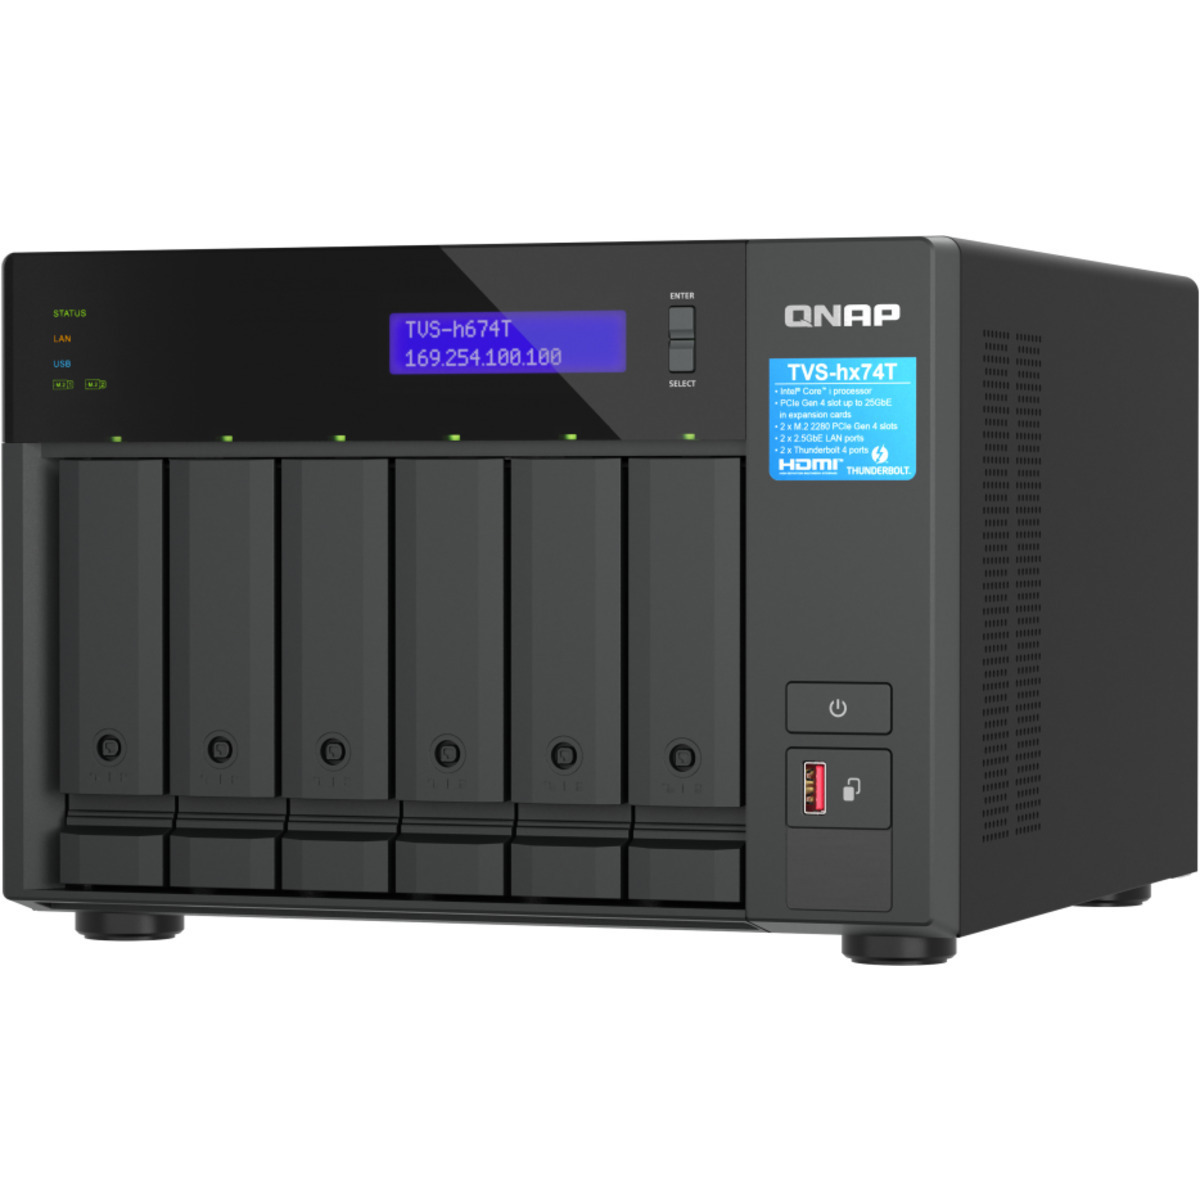 QNAP TVS-h674T Core i5 Thunderbolt 4 88tb 6-Bay Desktop Multimedia / Power User / Business DAS-NAS - Combo Direct + Network Storage Device 4x22tb Western Digital Red Pro WD221KFGX 3.5 7200rpm SATA 6Gb/s HDD NAS Class Drives Installed - Burn-In Tested TVS-h674T Core i5 Thunderbolt 4